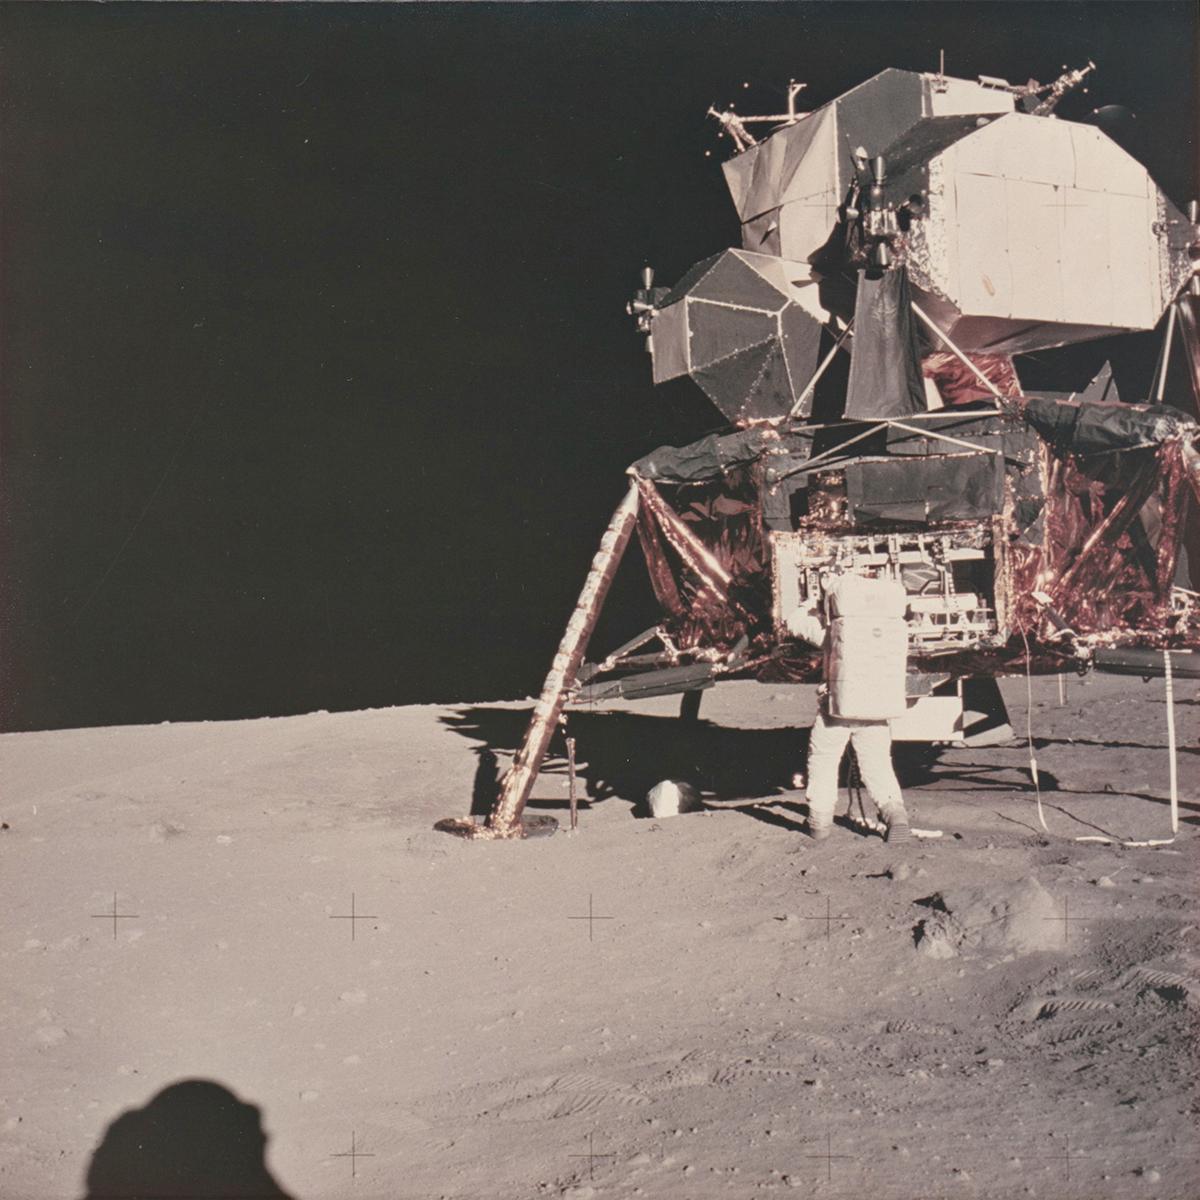 Patrick Parrish is excited to offer an incredible group of original photographs printed by Meisel Photochrome Corporation of Dallas around 1970, shortly after the Apollo 11 Mission. Meisel was the official photo contractor for NASA and processed all